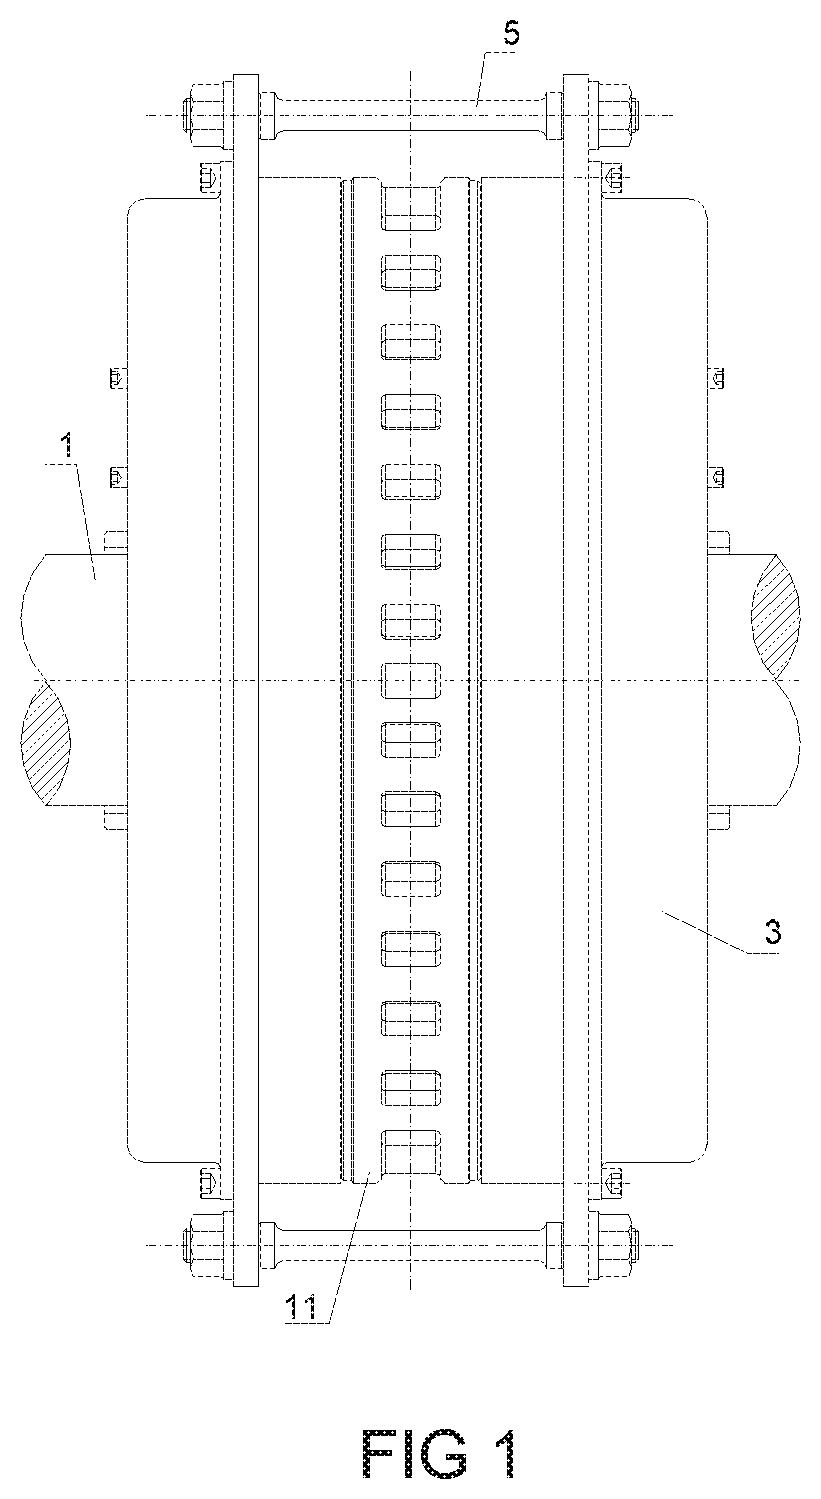 Autonomous retarder system for a vehicle, and vehicle including same